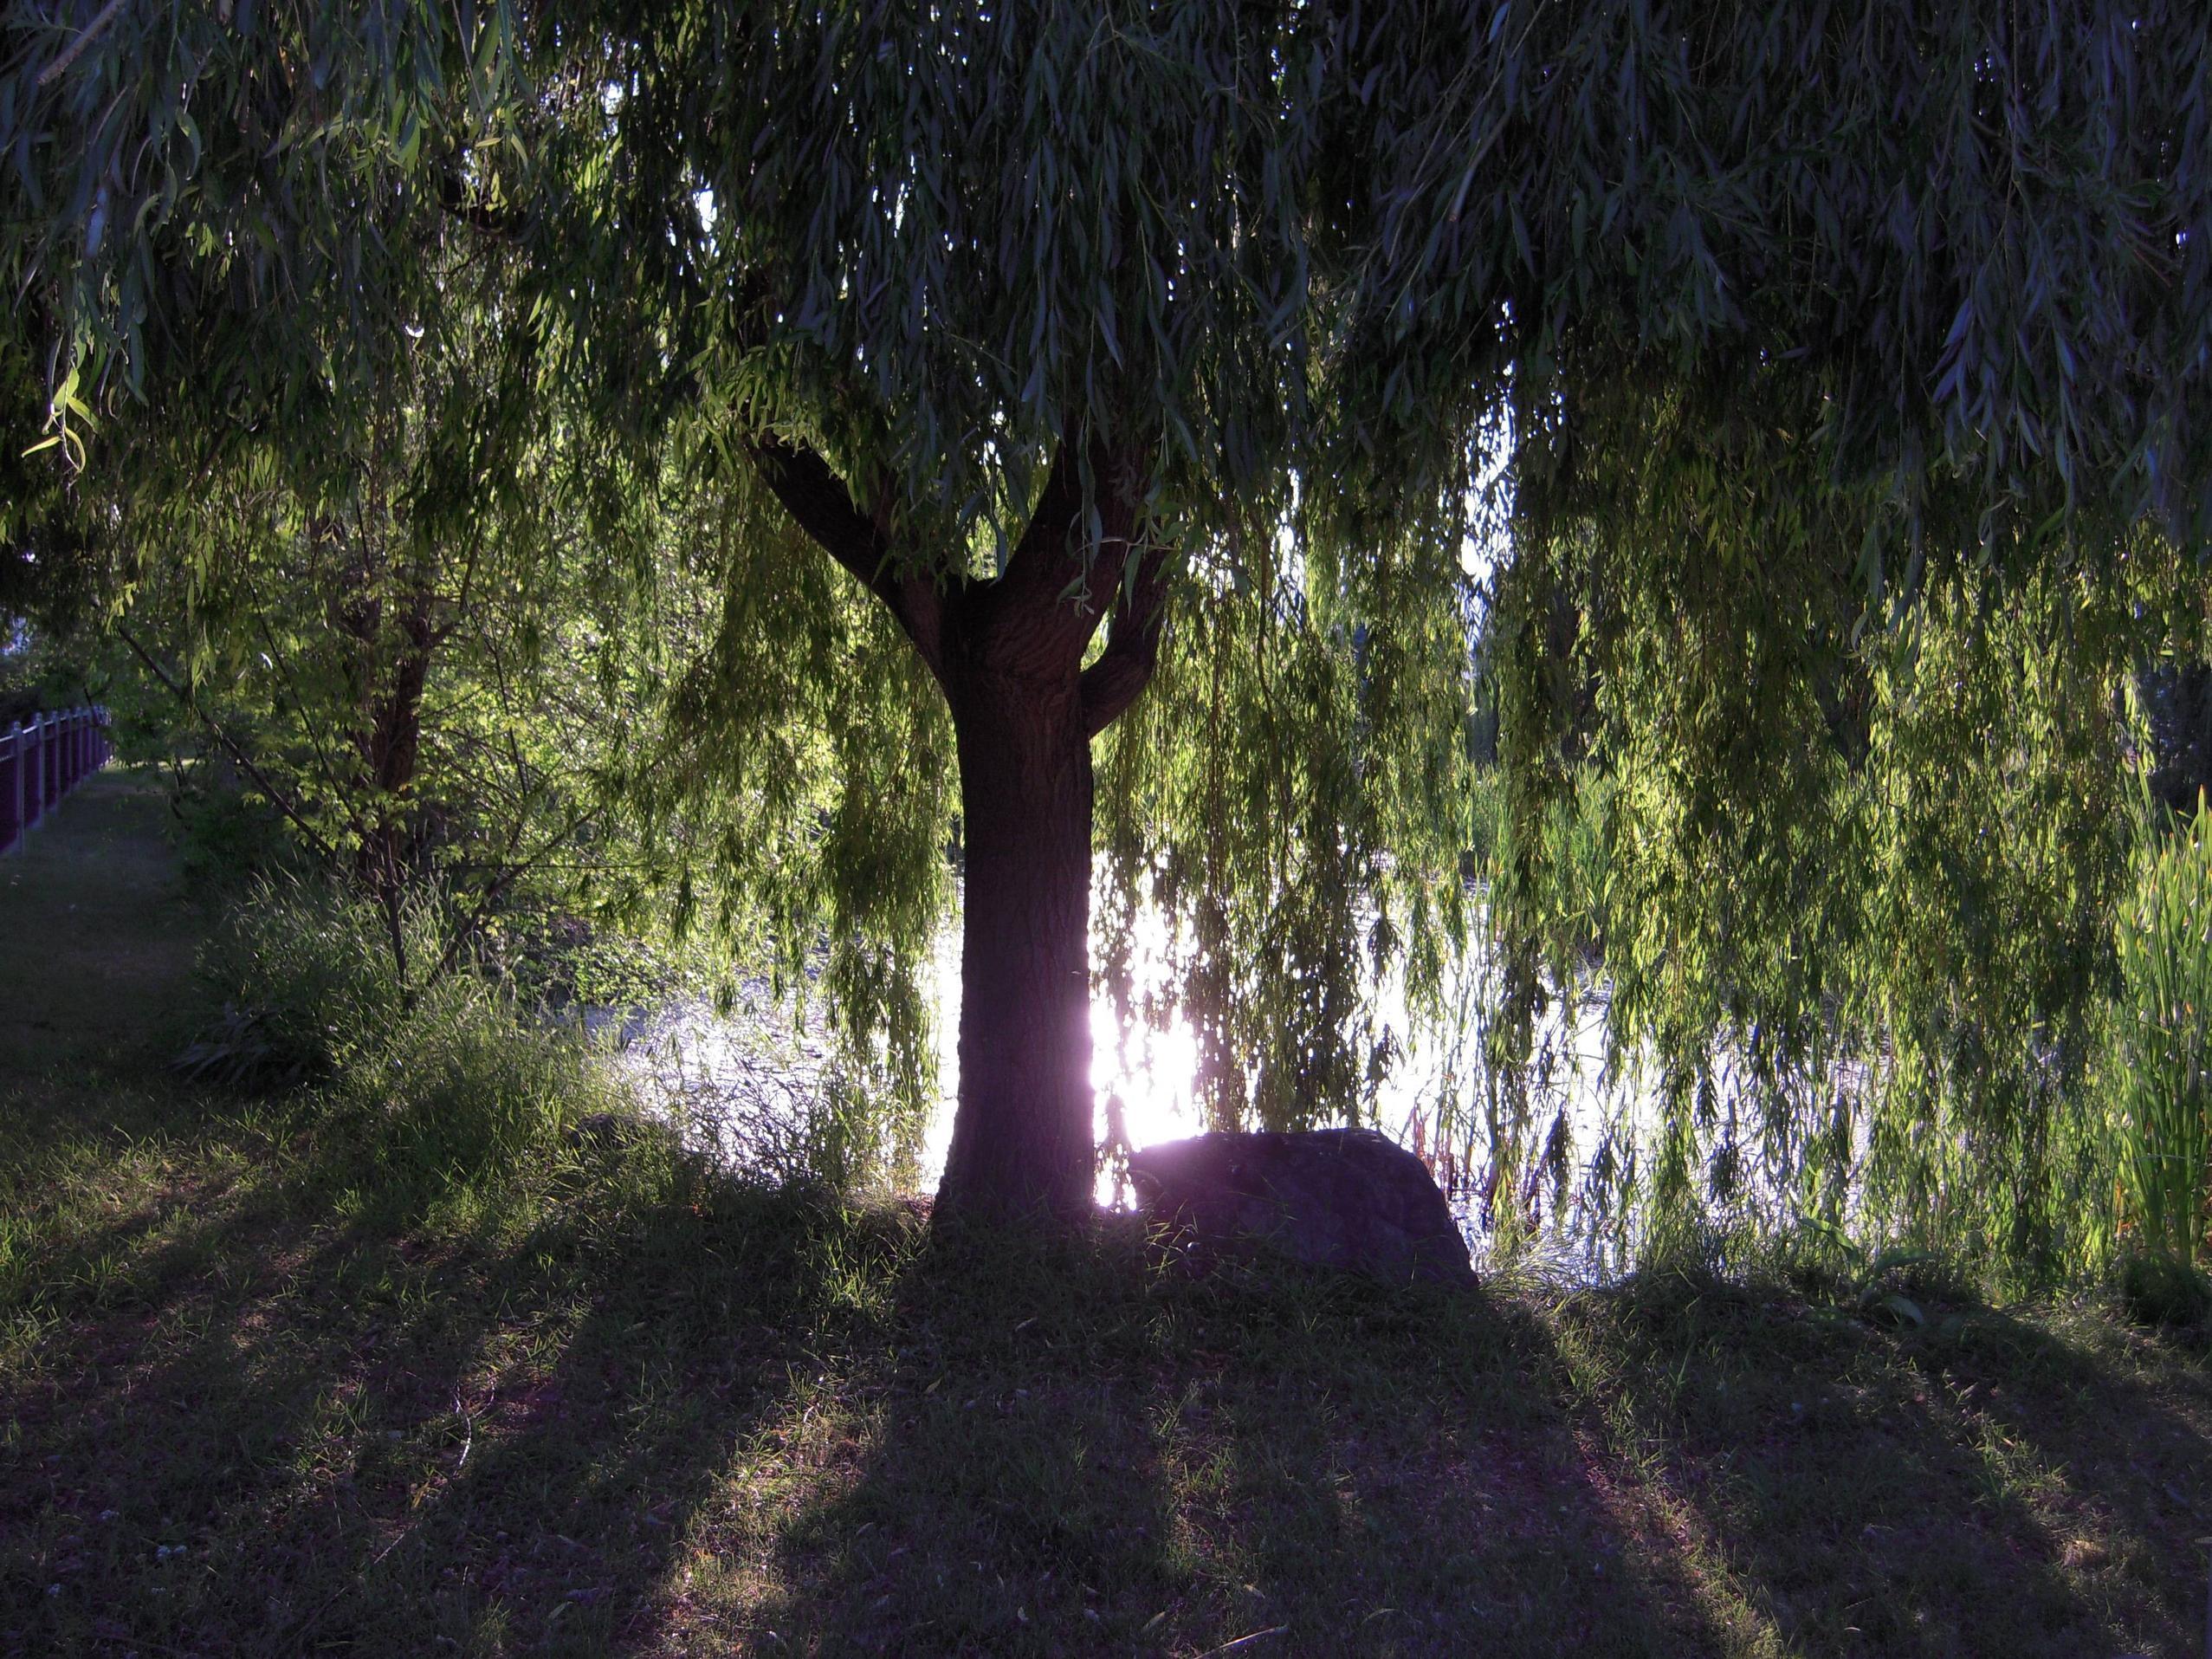 Weeping Willow Wallpapers Wallpaper Cave